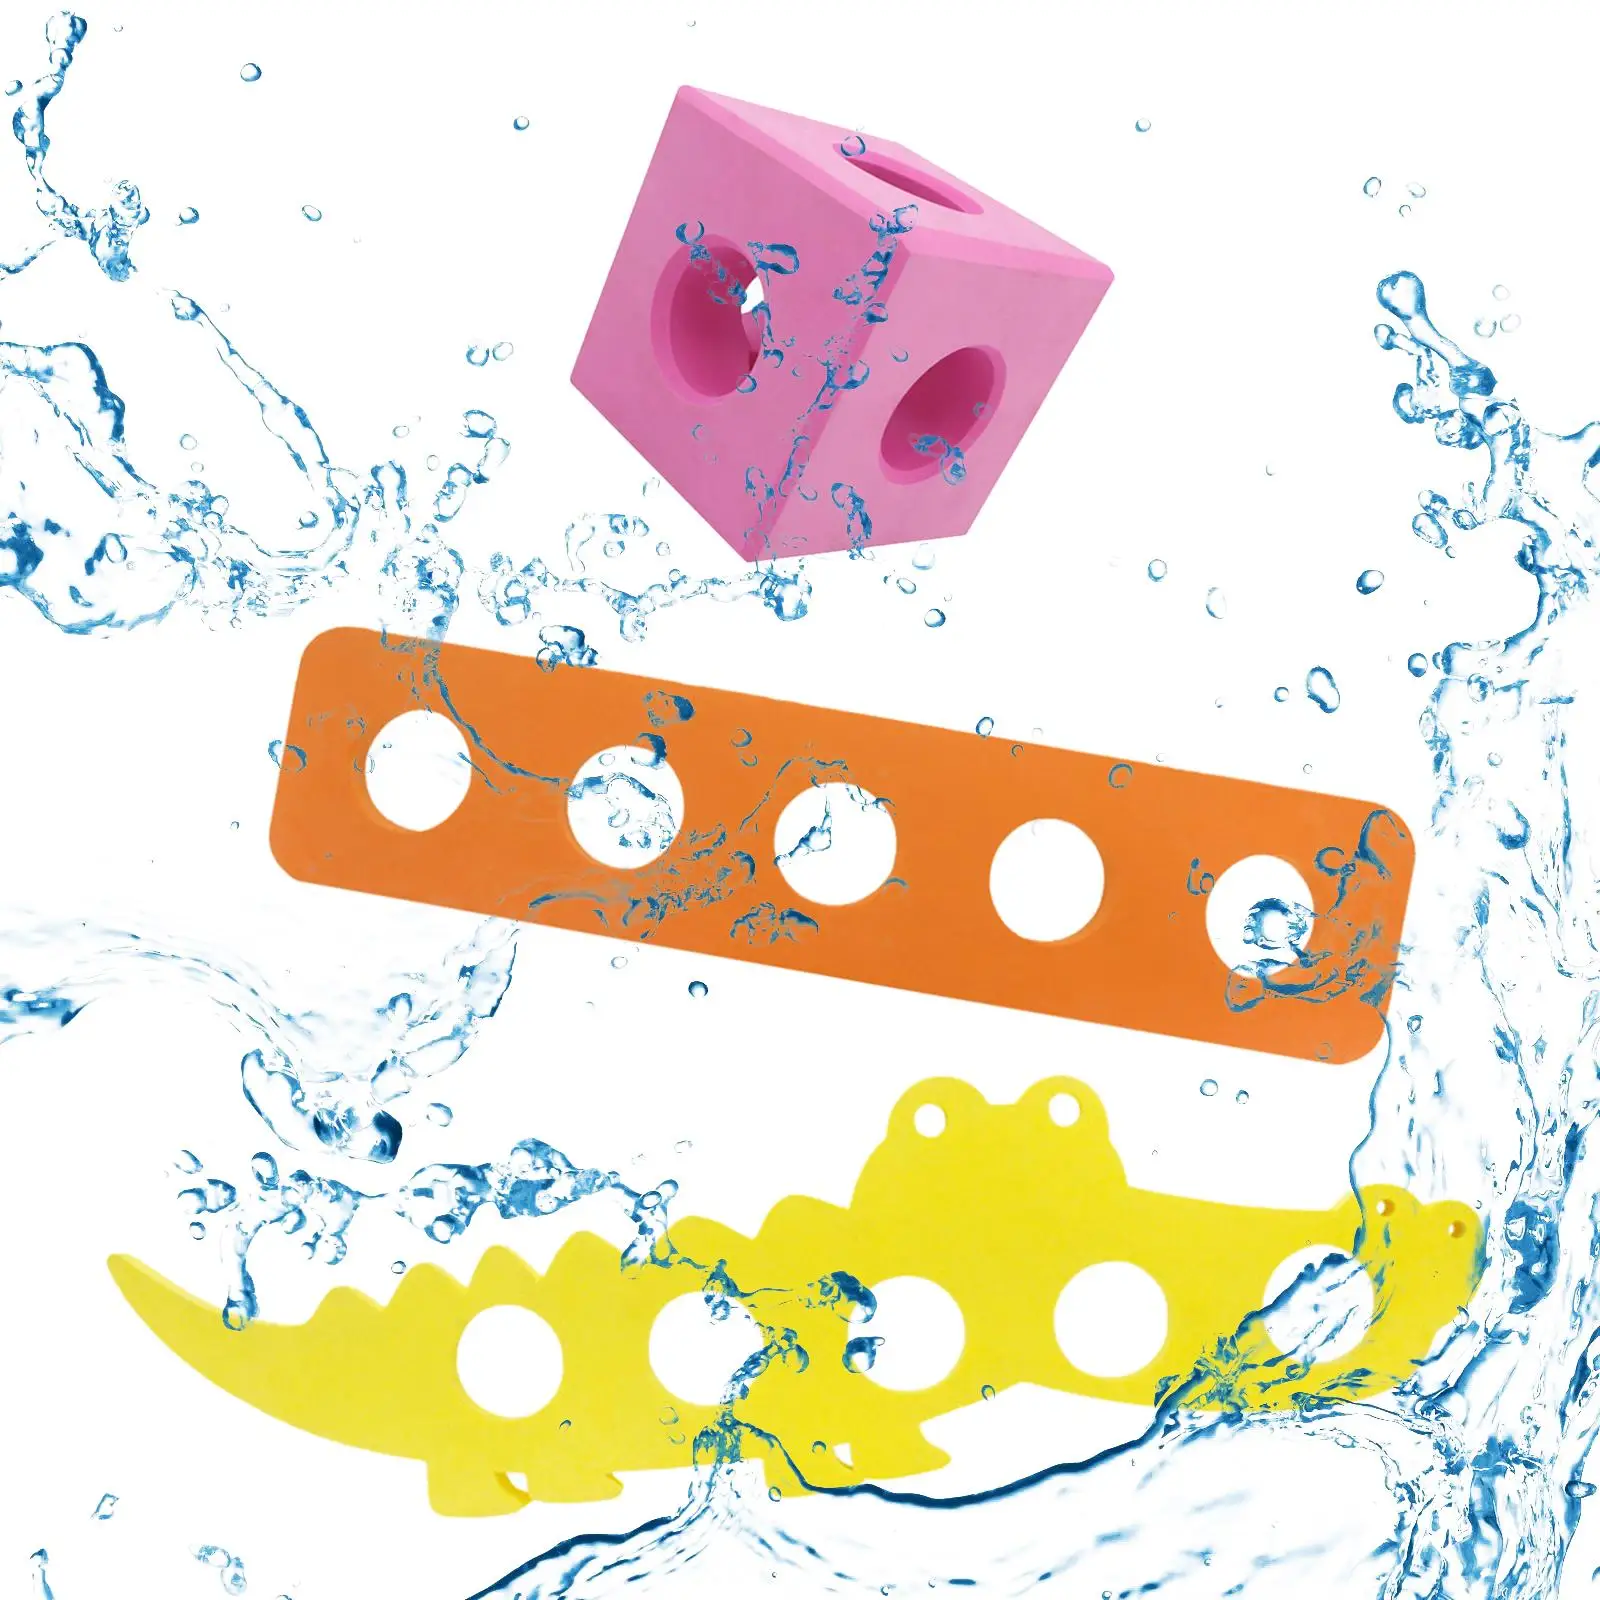 Pool Connector Water Toy Holed Swimming Pool Toy Builder Water Connector Foam Tube Connector for Summer Party Beds Lake Beach